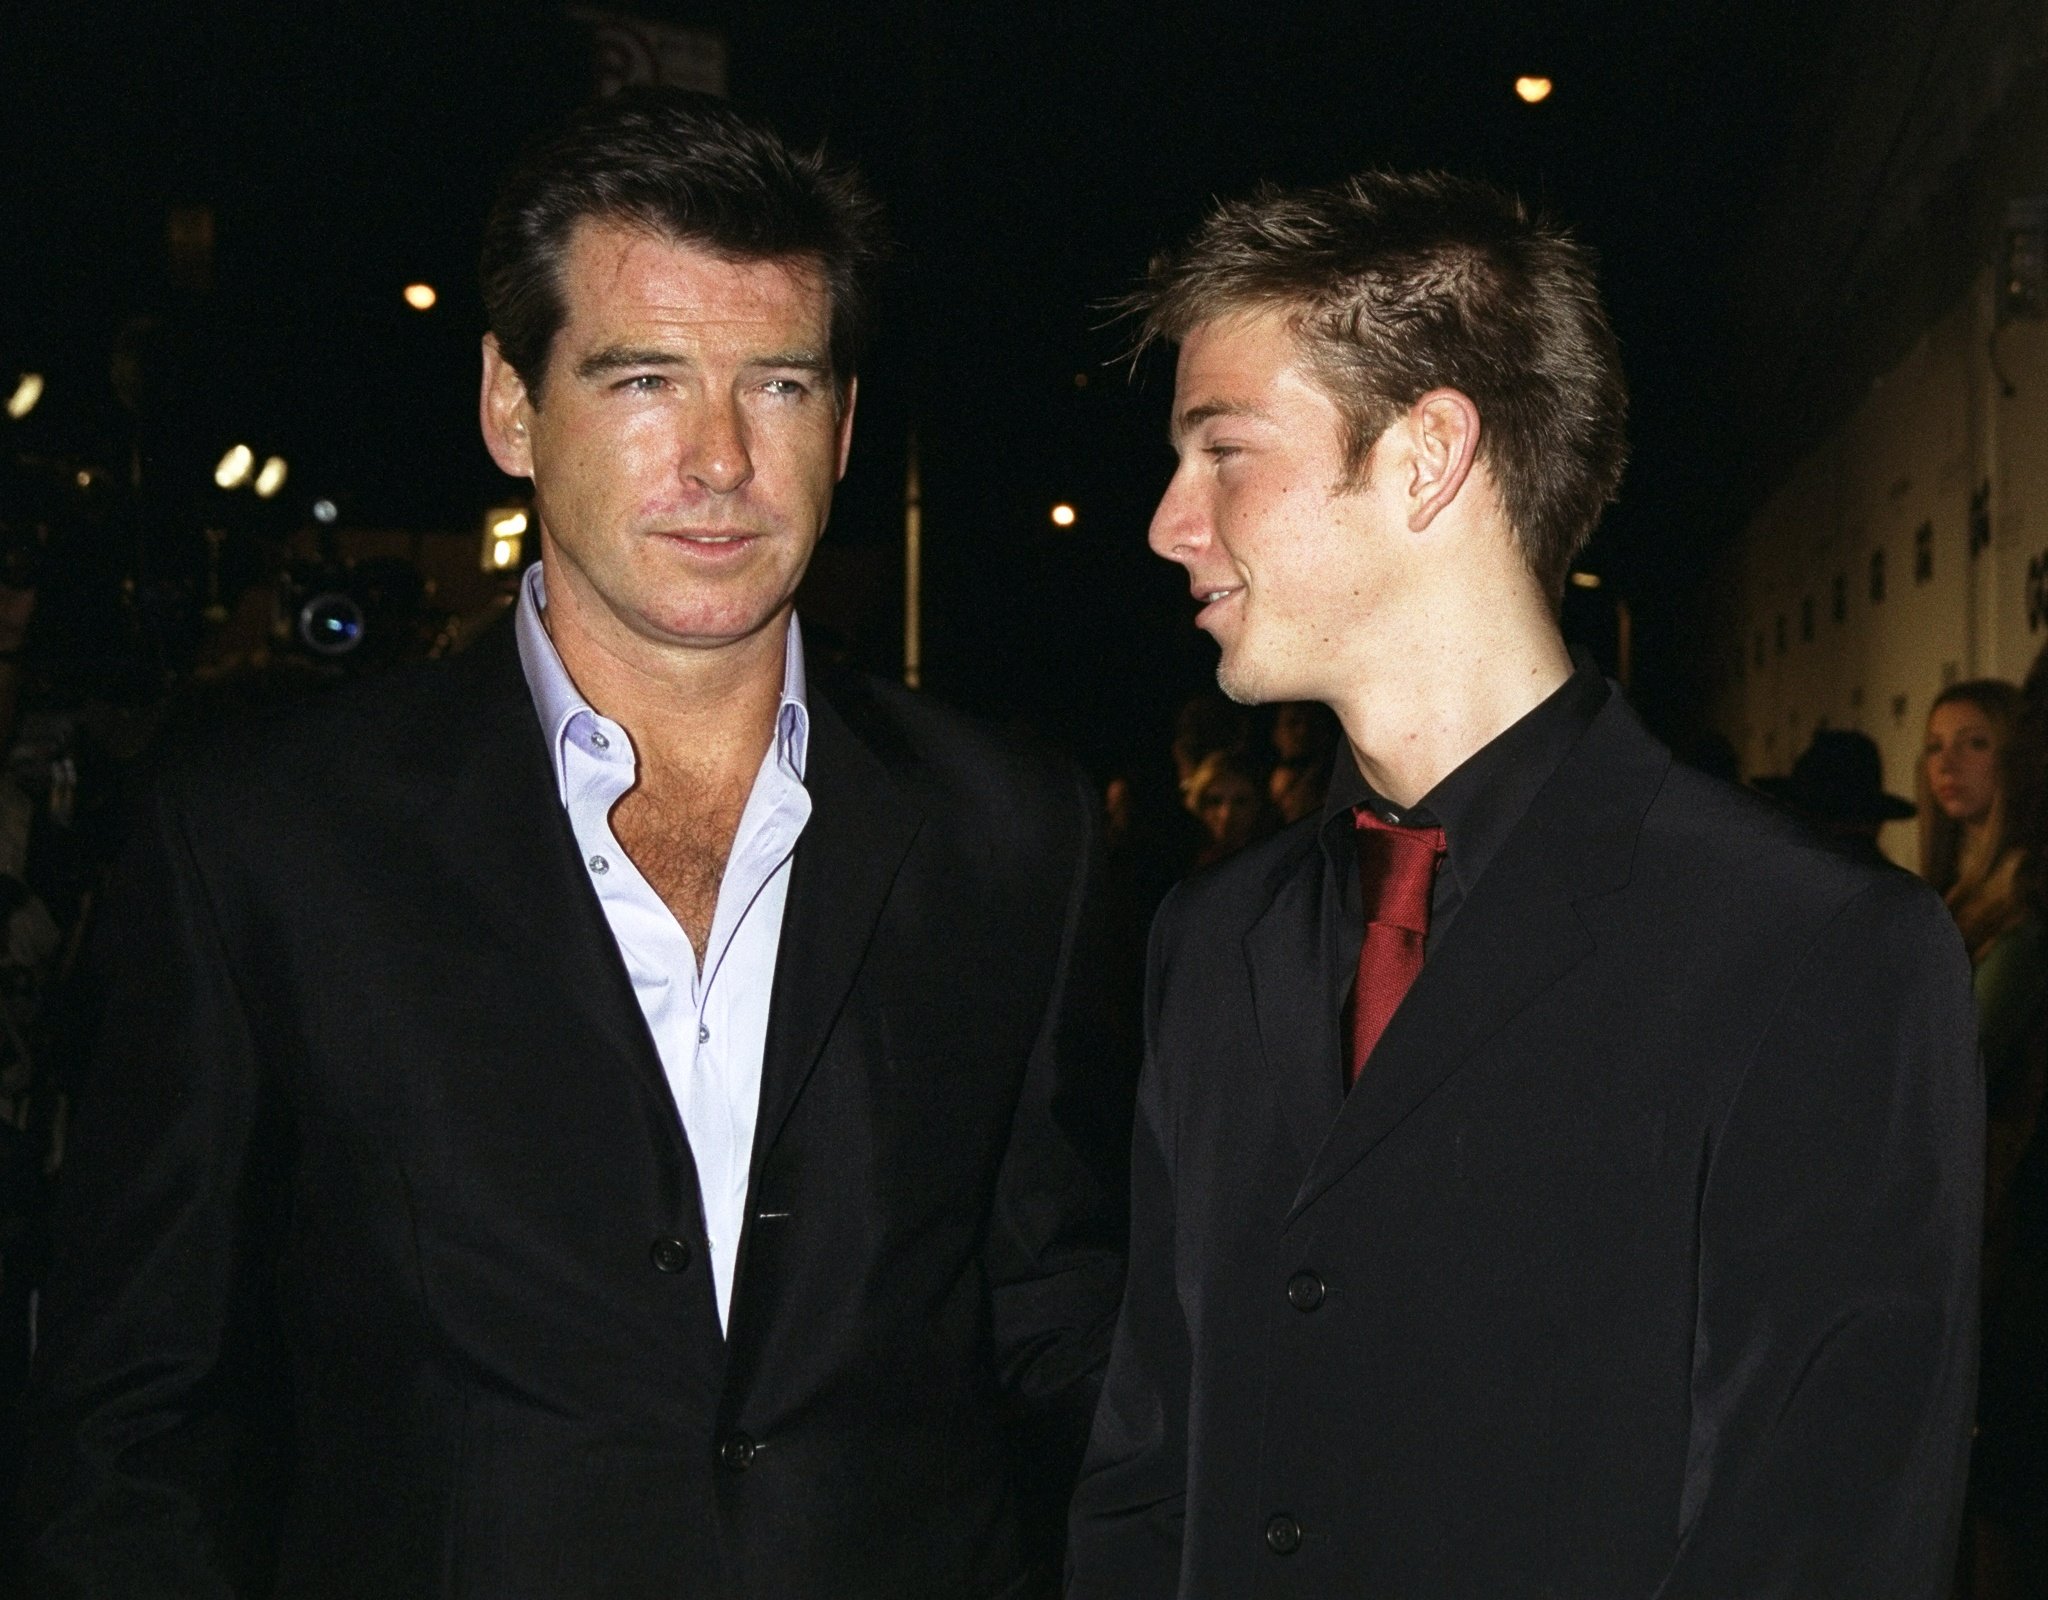 Pierce Brosnan and son Sean arrive at GQ's fifth annual "Men Of The Year" Awards honoring men of distinction at the Beacon Theater. Brosnan was honored as Most Stylish Man, Circa 2000. | Source: Getty Images.